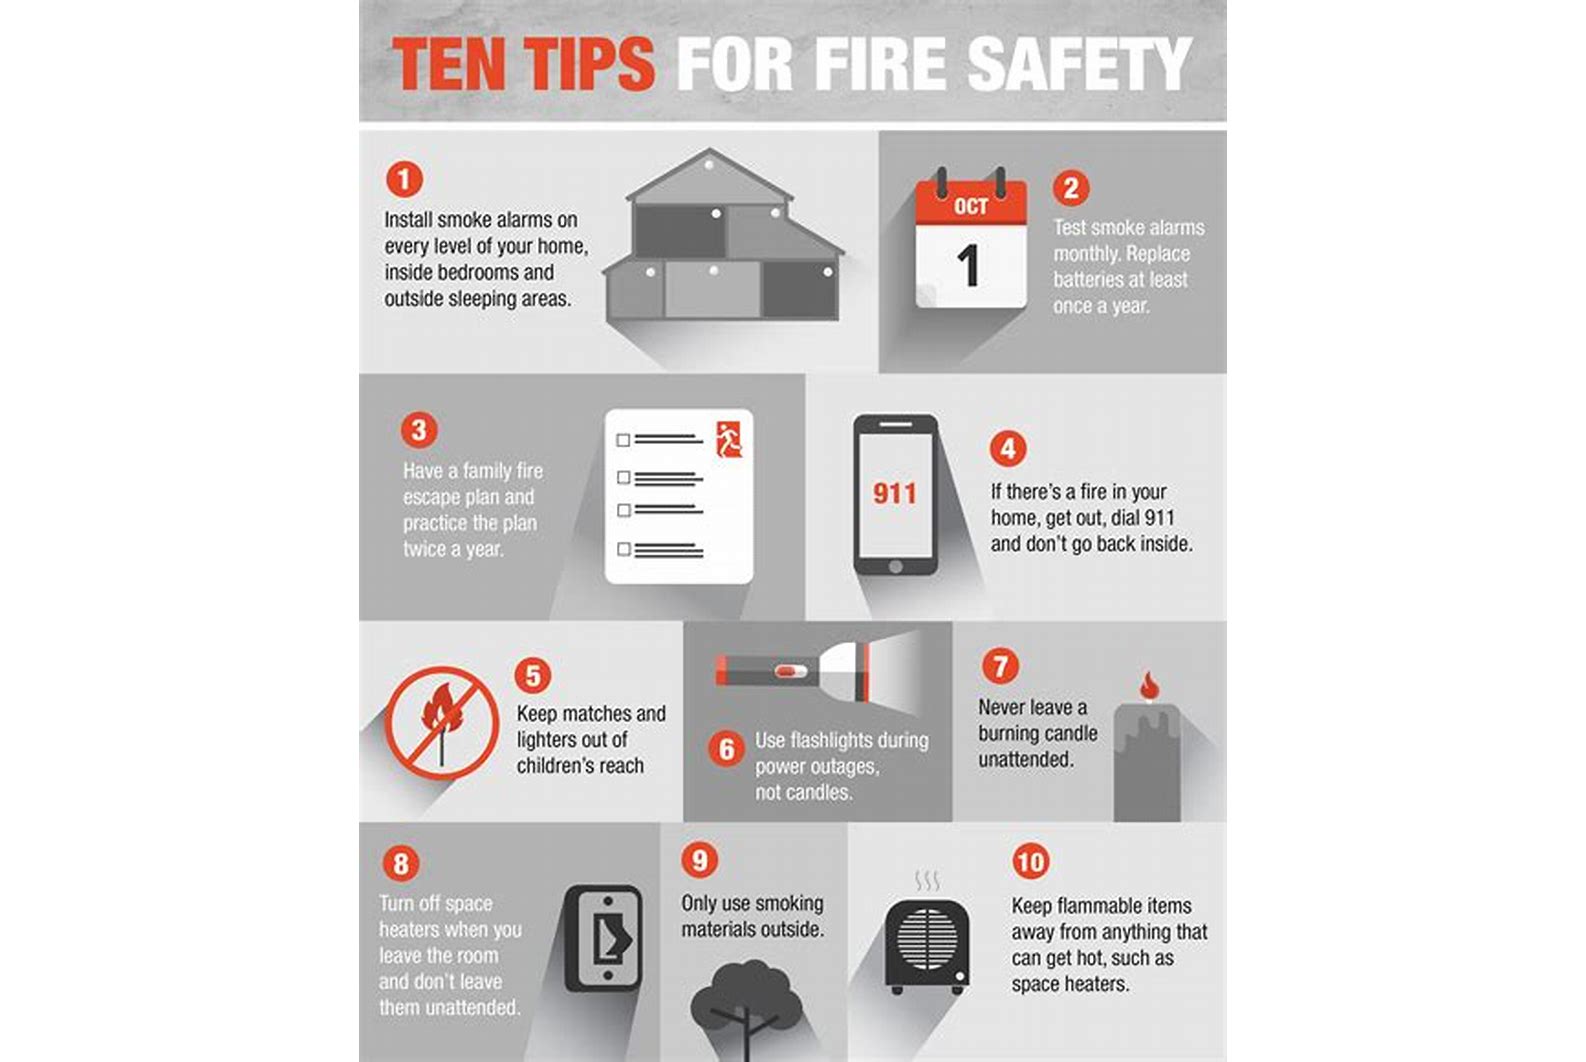 fire prevention tips